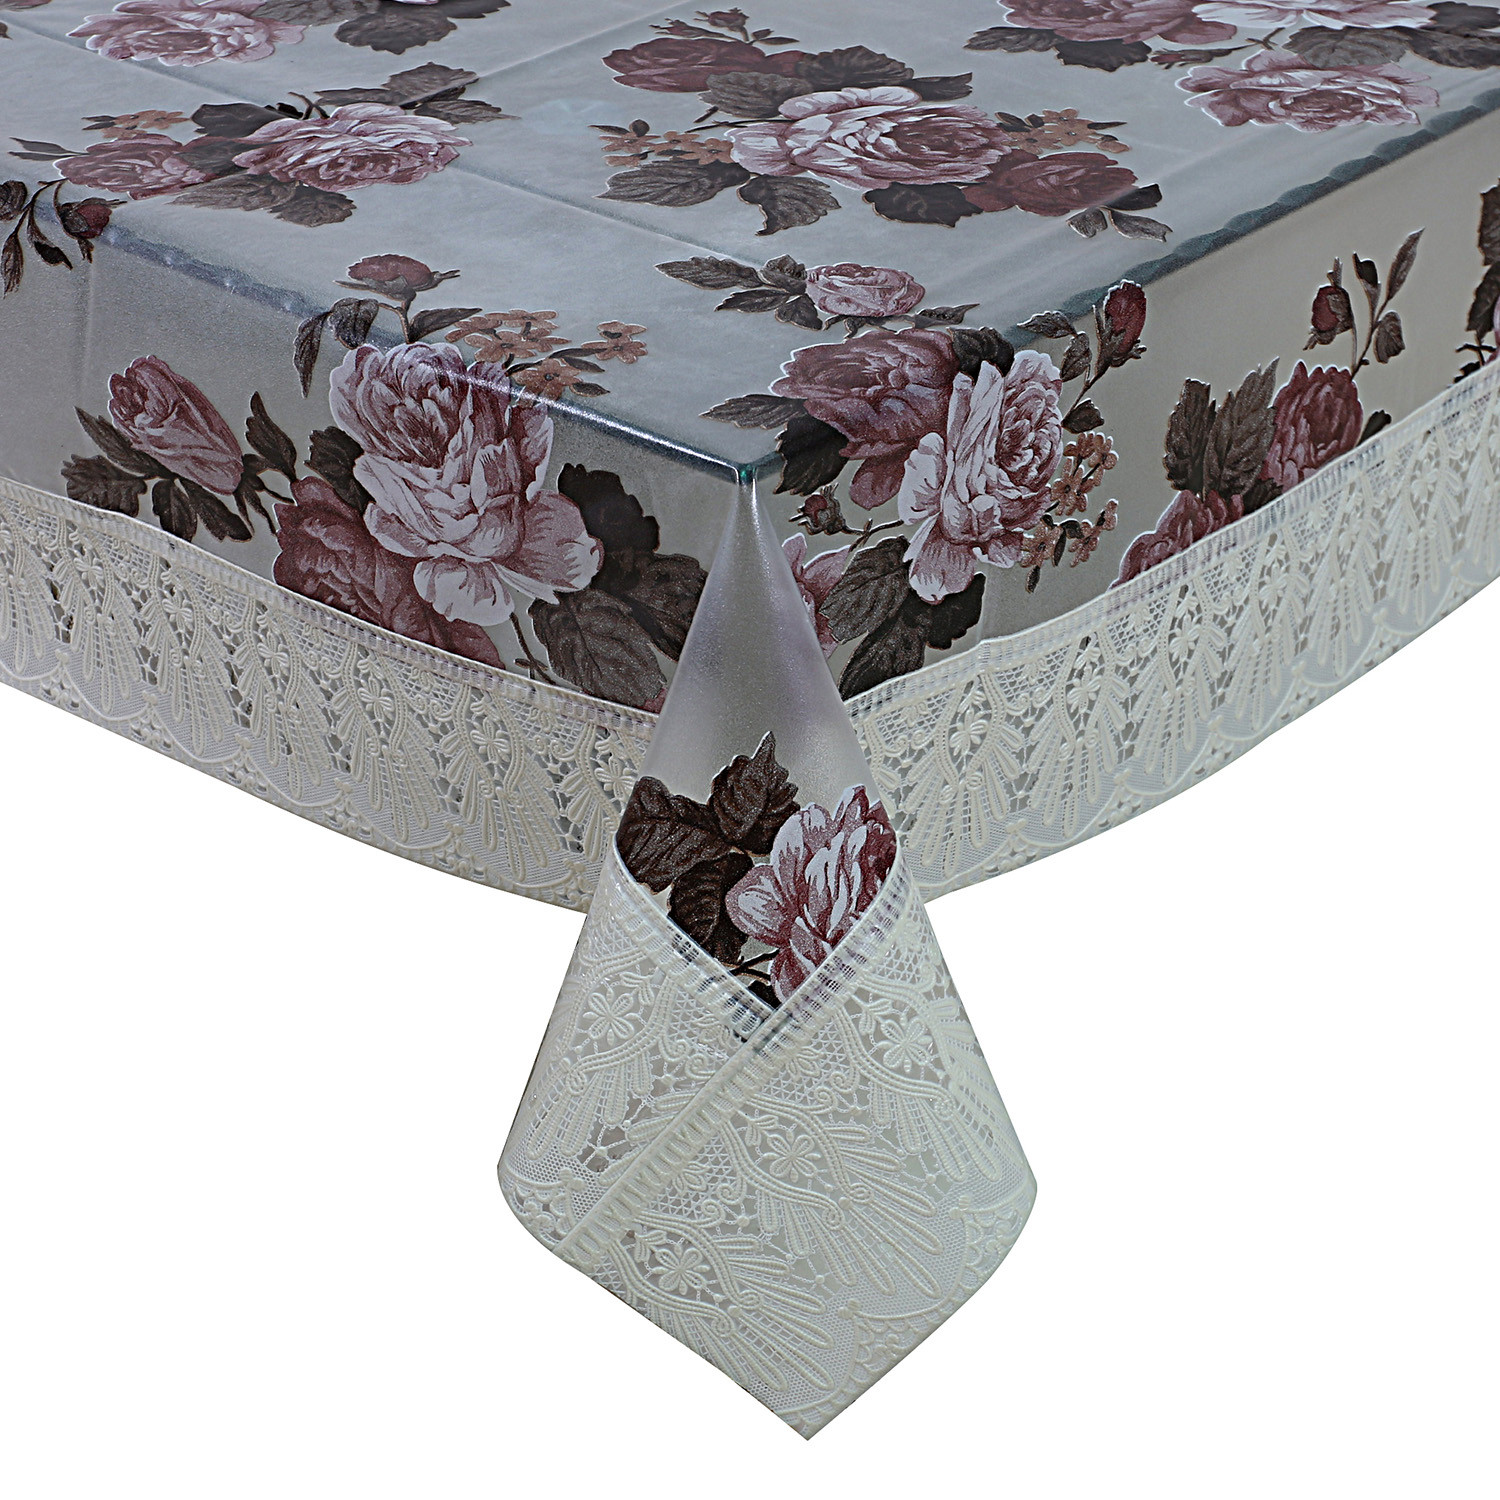 Kuber Industries PVC Waterproof Attractive Flower Design Center Table Cover|Table Cloth With Cream Lace Border, 40x60 inch (Cream)